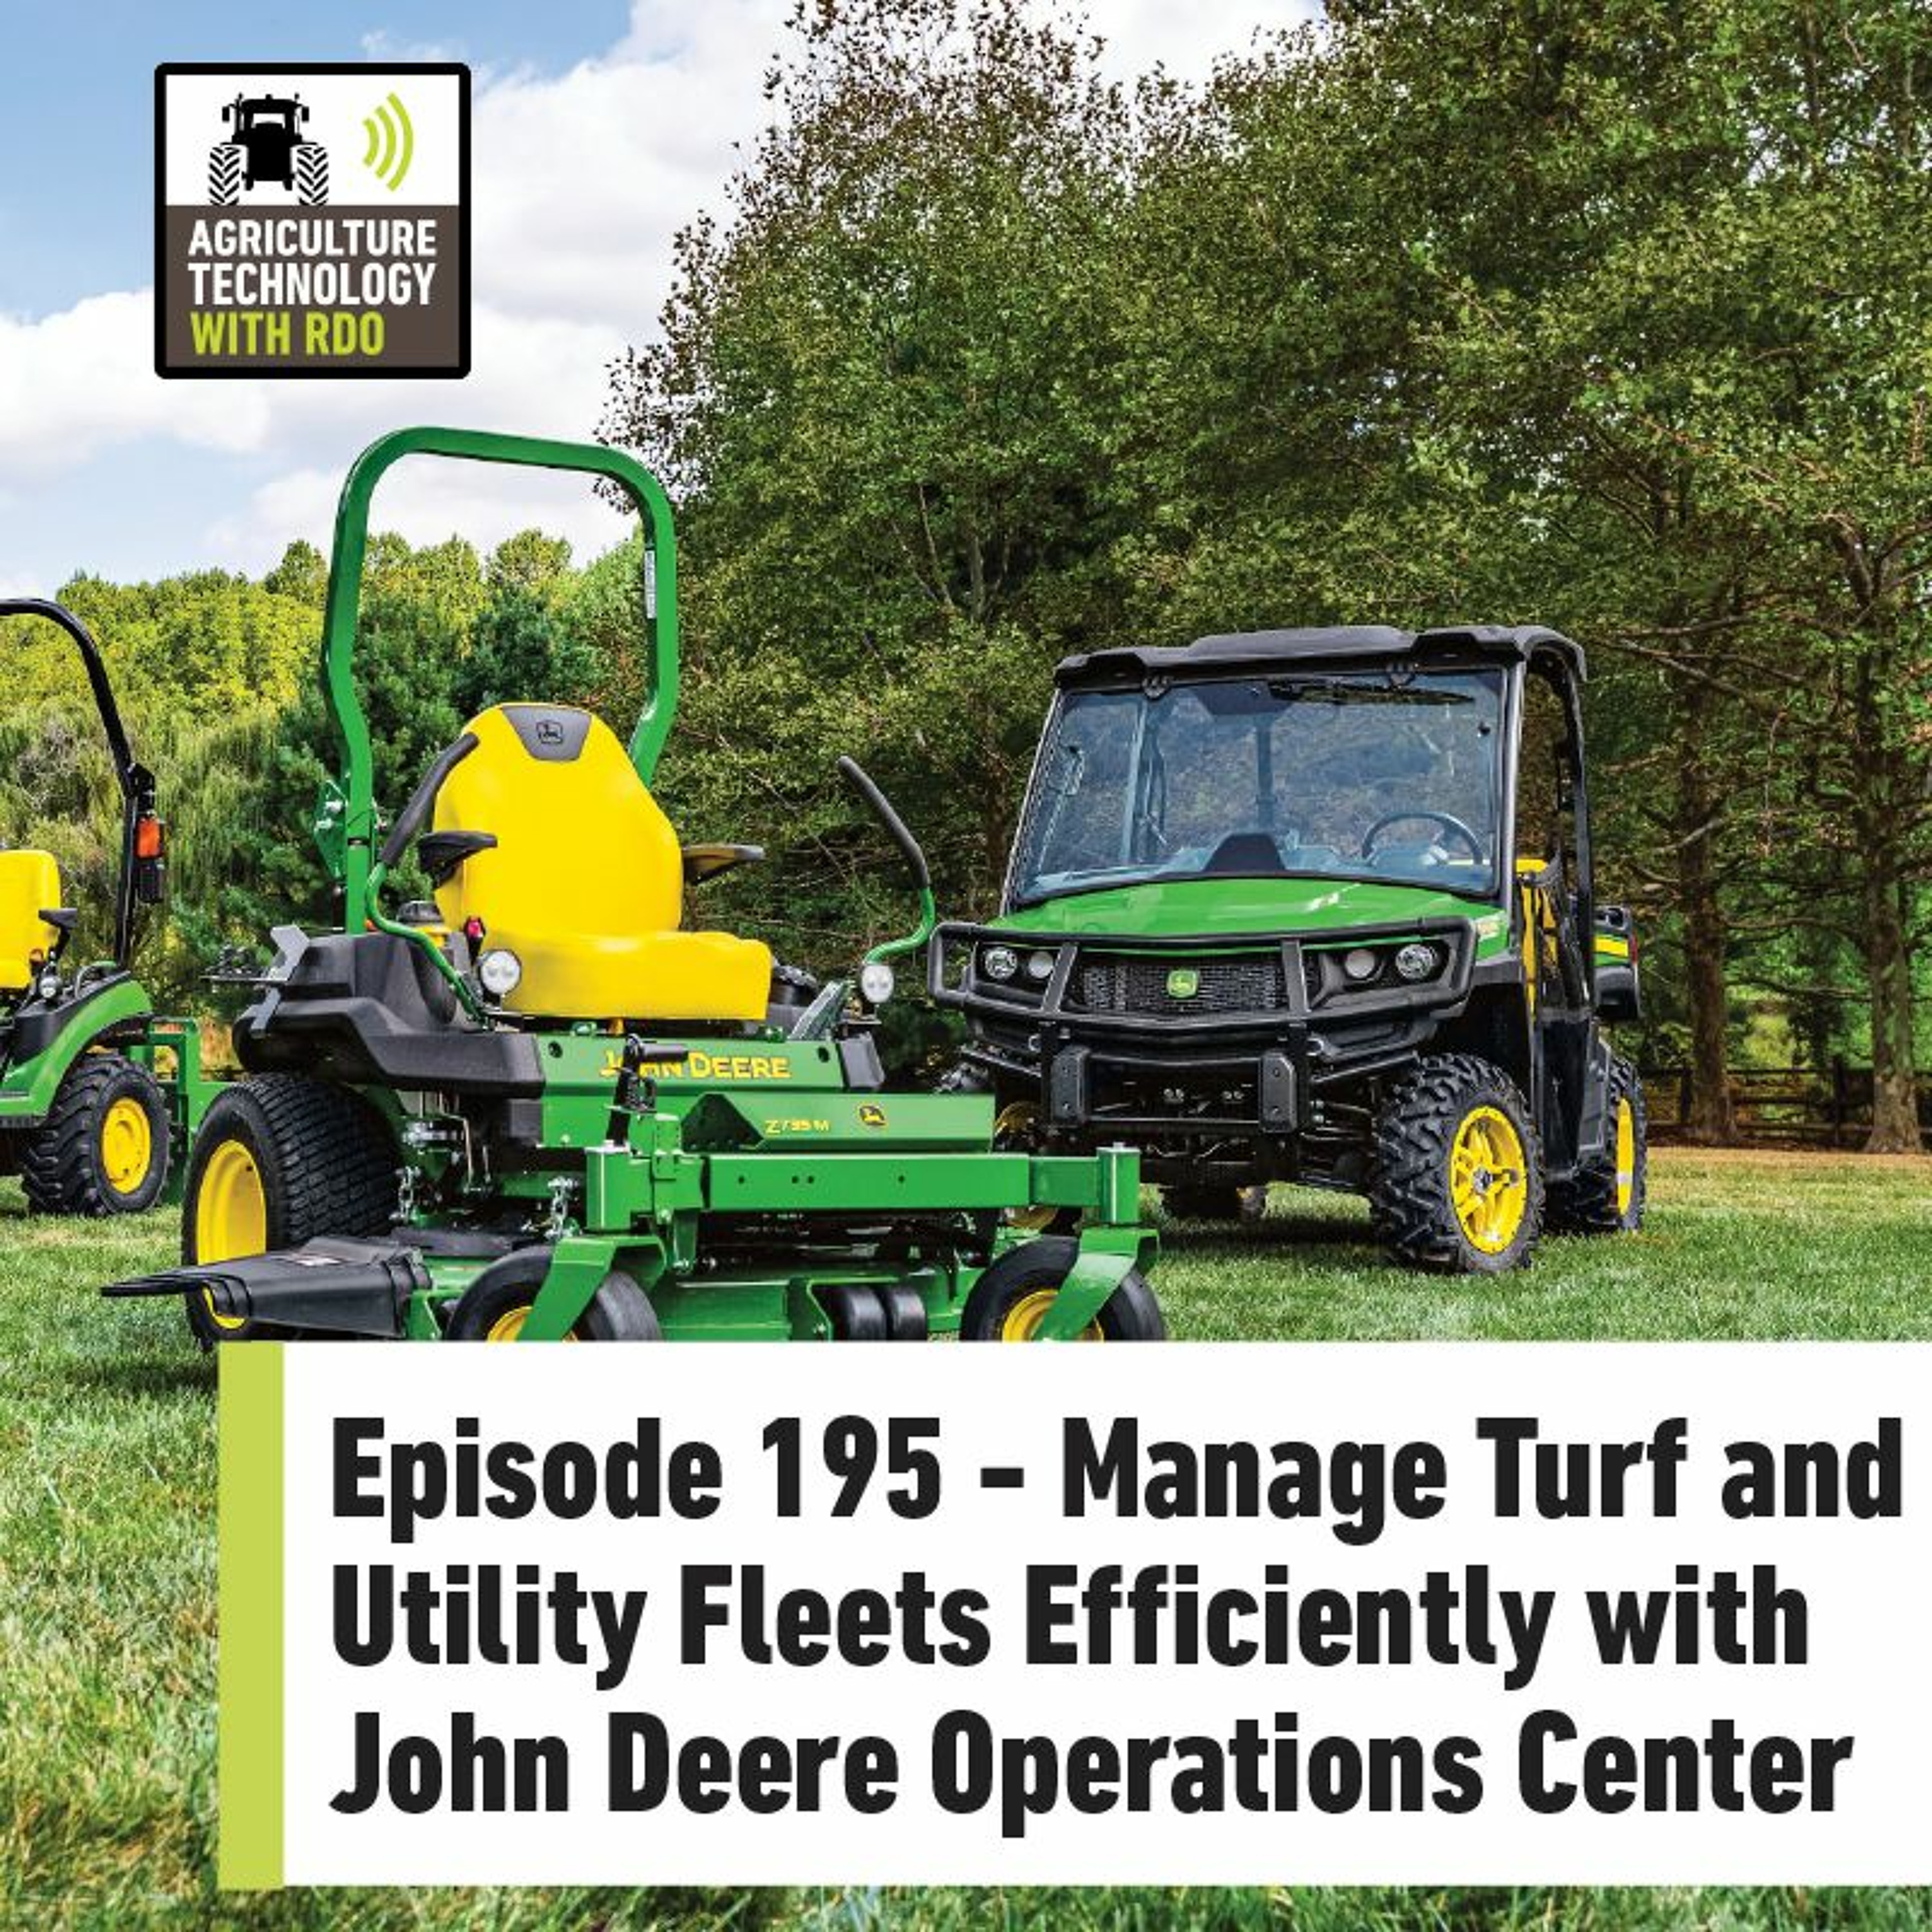 Ep. 195 - Manage Turf and Utility Fleets Efficiently with John Deere Operations Center